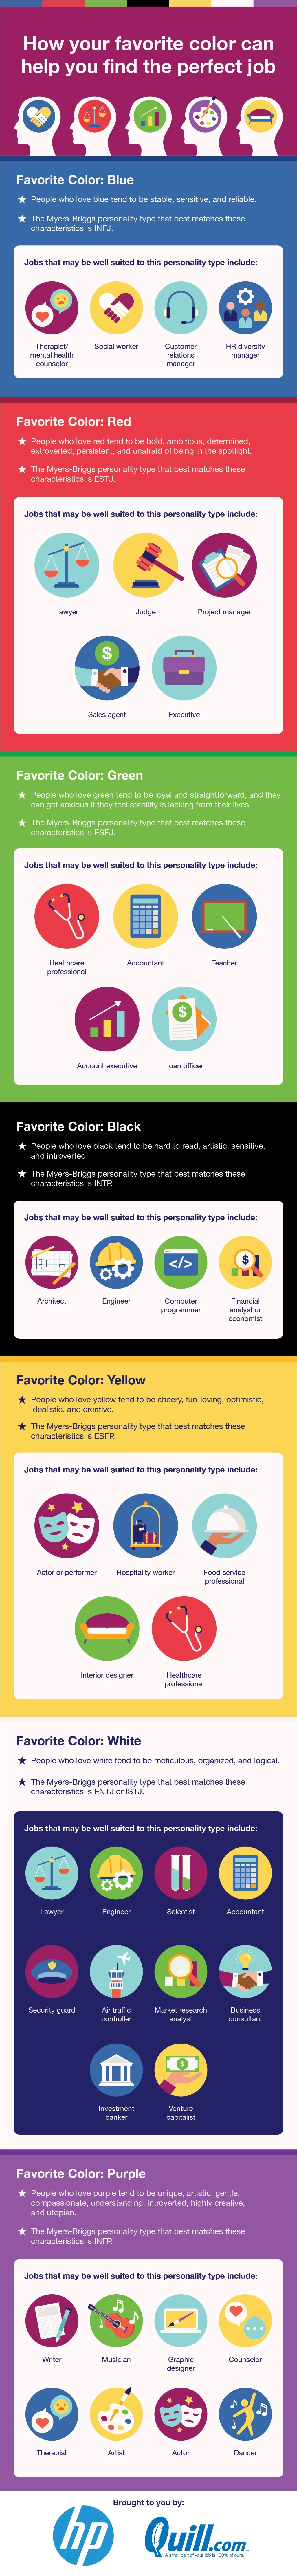 How Your Favorite Color Can Help You Find the Perfect Job - #infographic